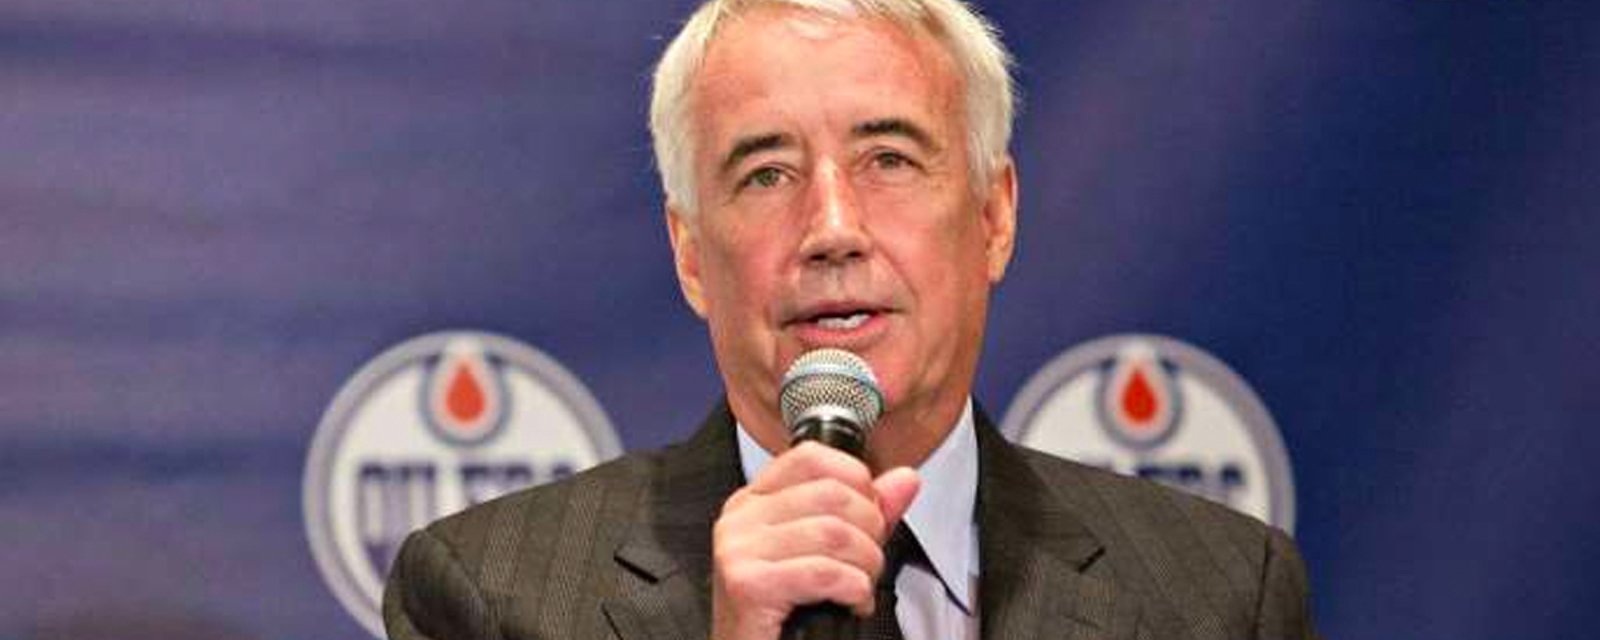 Report: Oilers receive permission to speak to new GM candidate